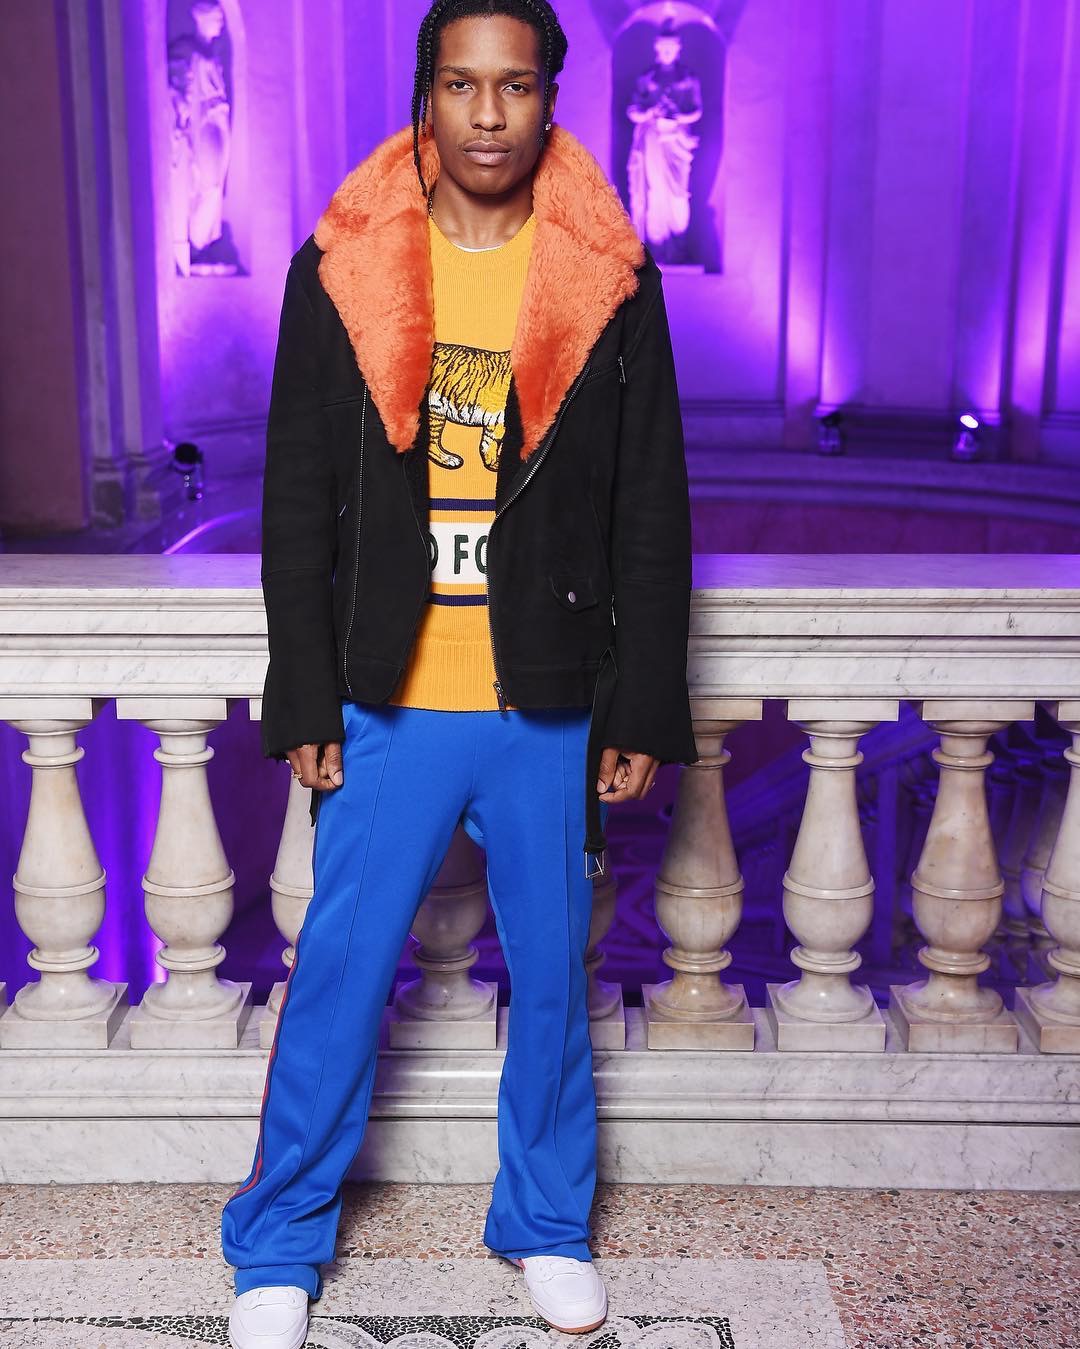 SPOTTED: A$AP Rocky In Midnight Studios And Adidas Sweatpants